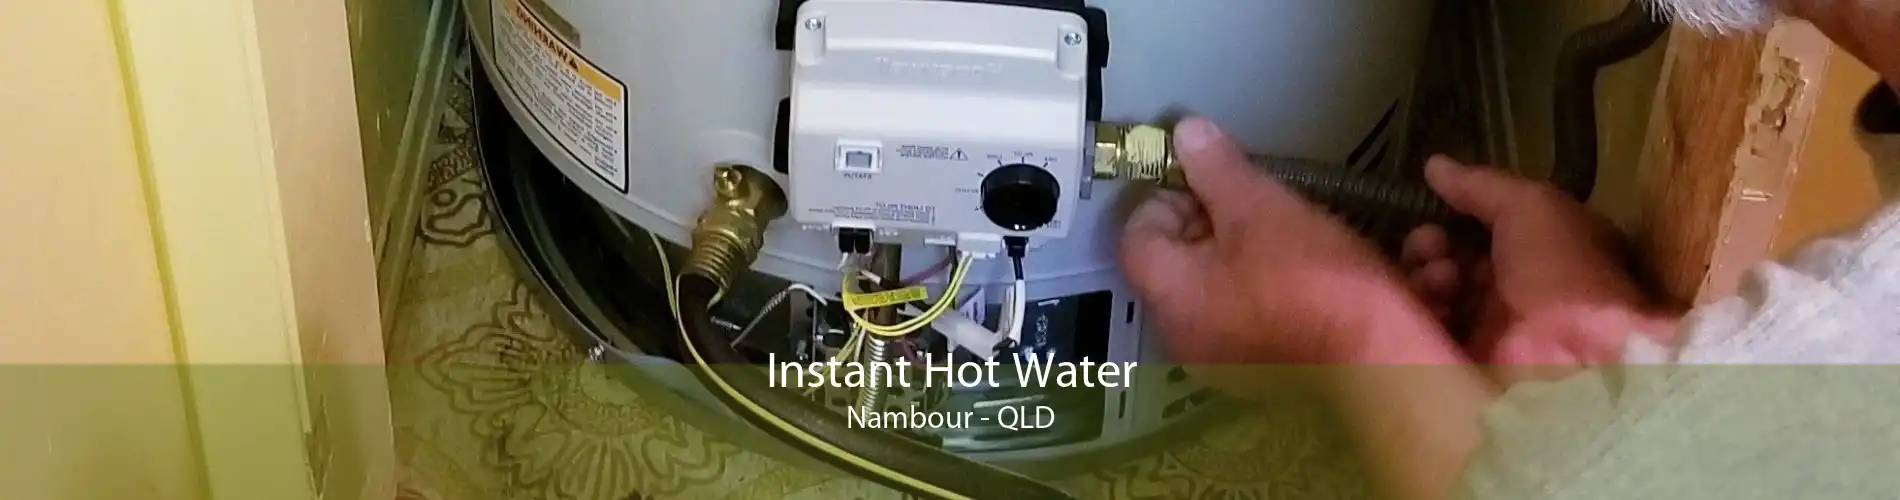 Instant Hot Water Nambour - QLD